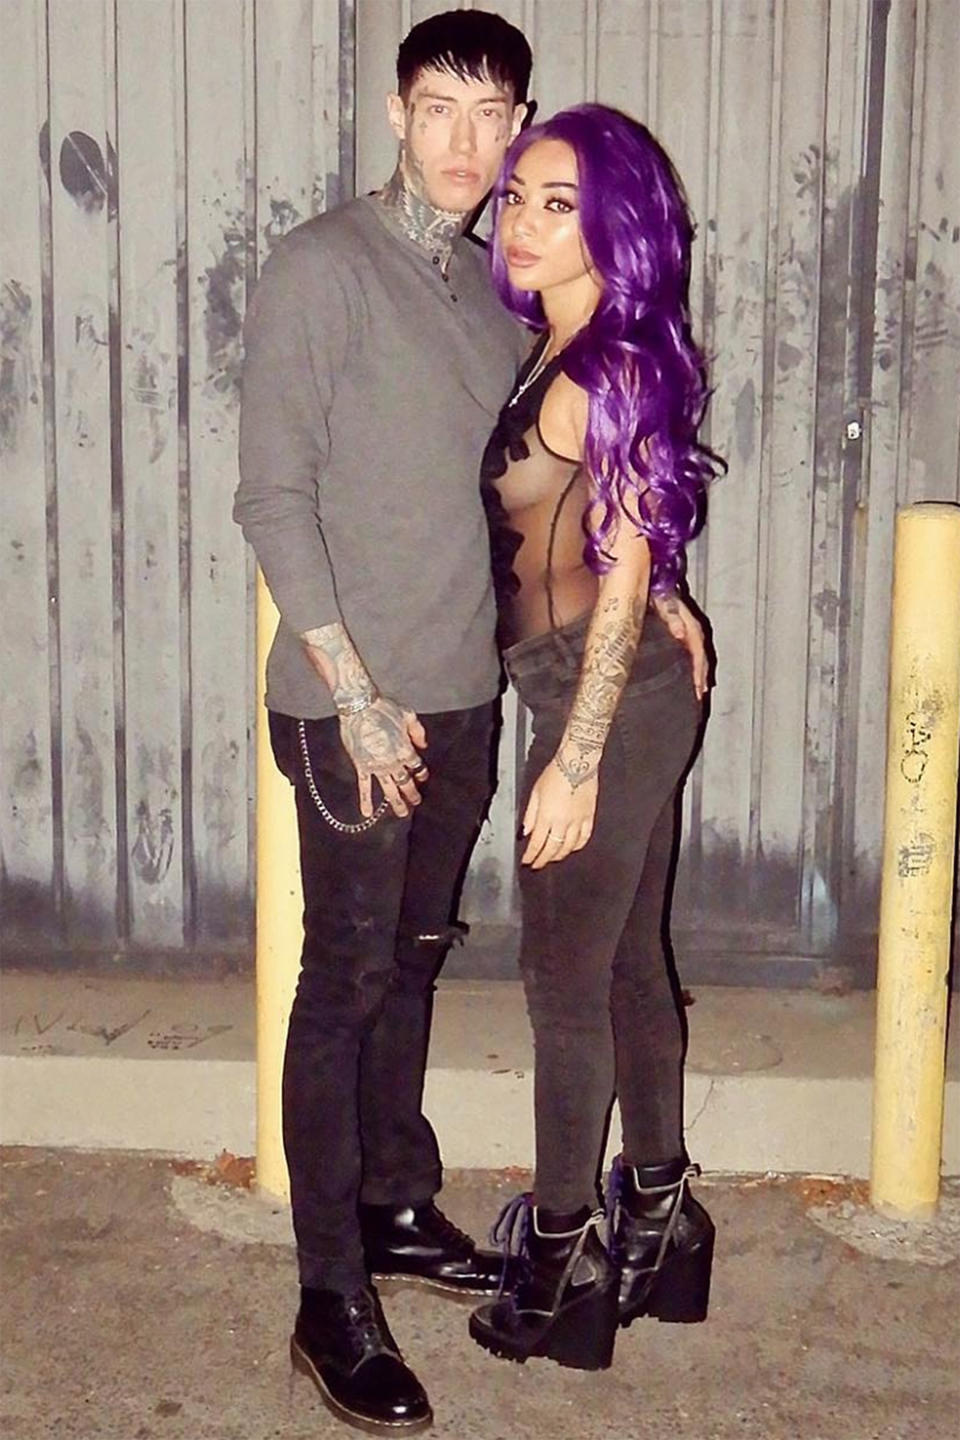 Trace Cyrus Responds to Followers Who Reported Photo of His Fiancée